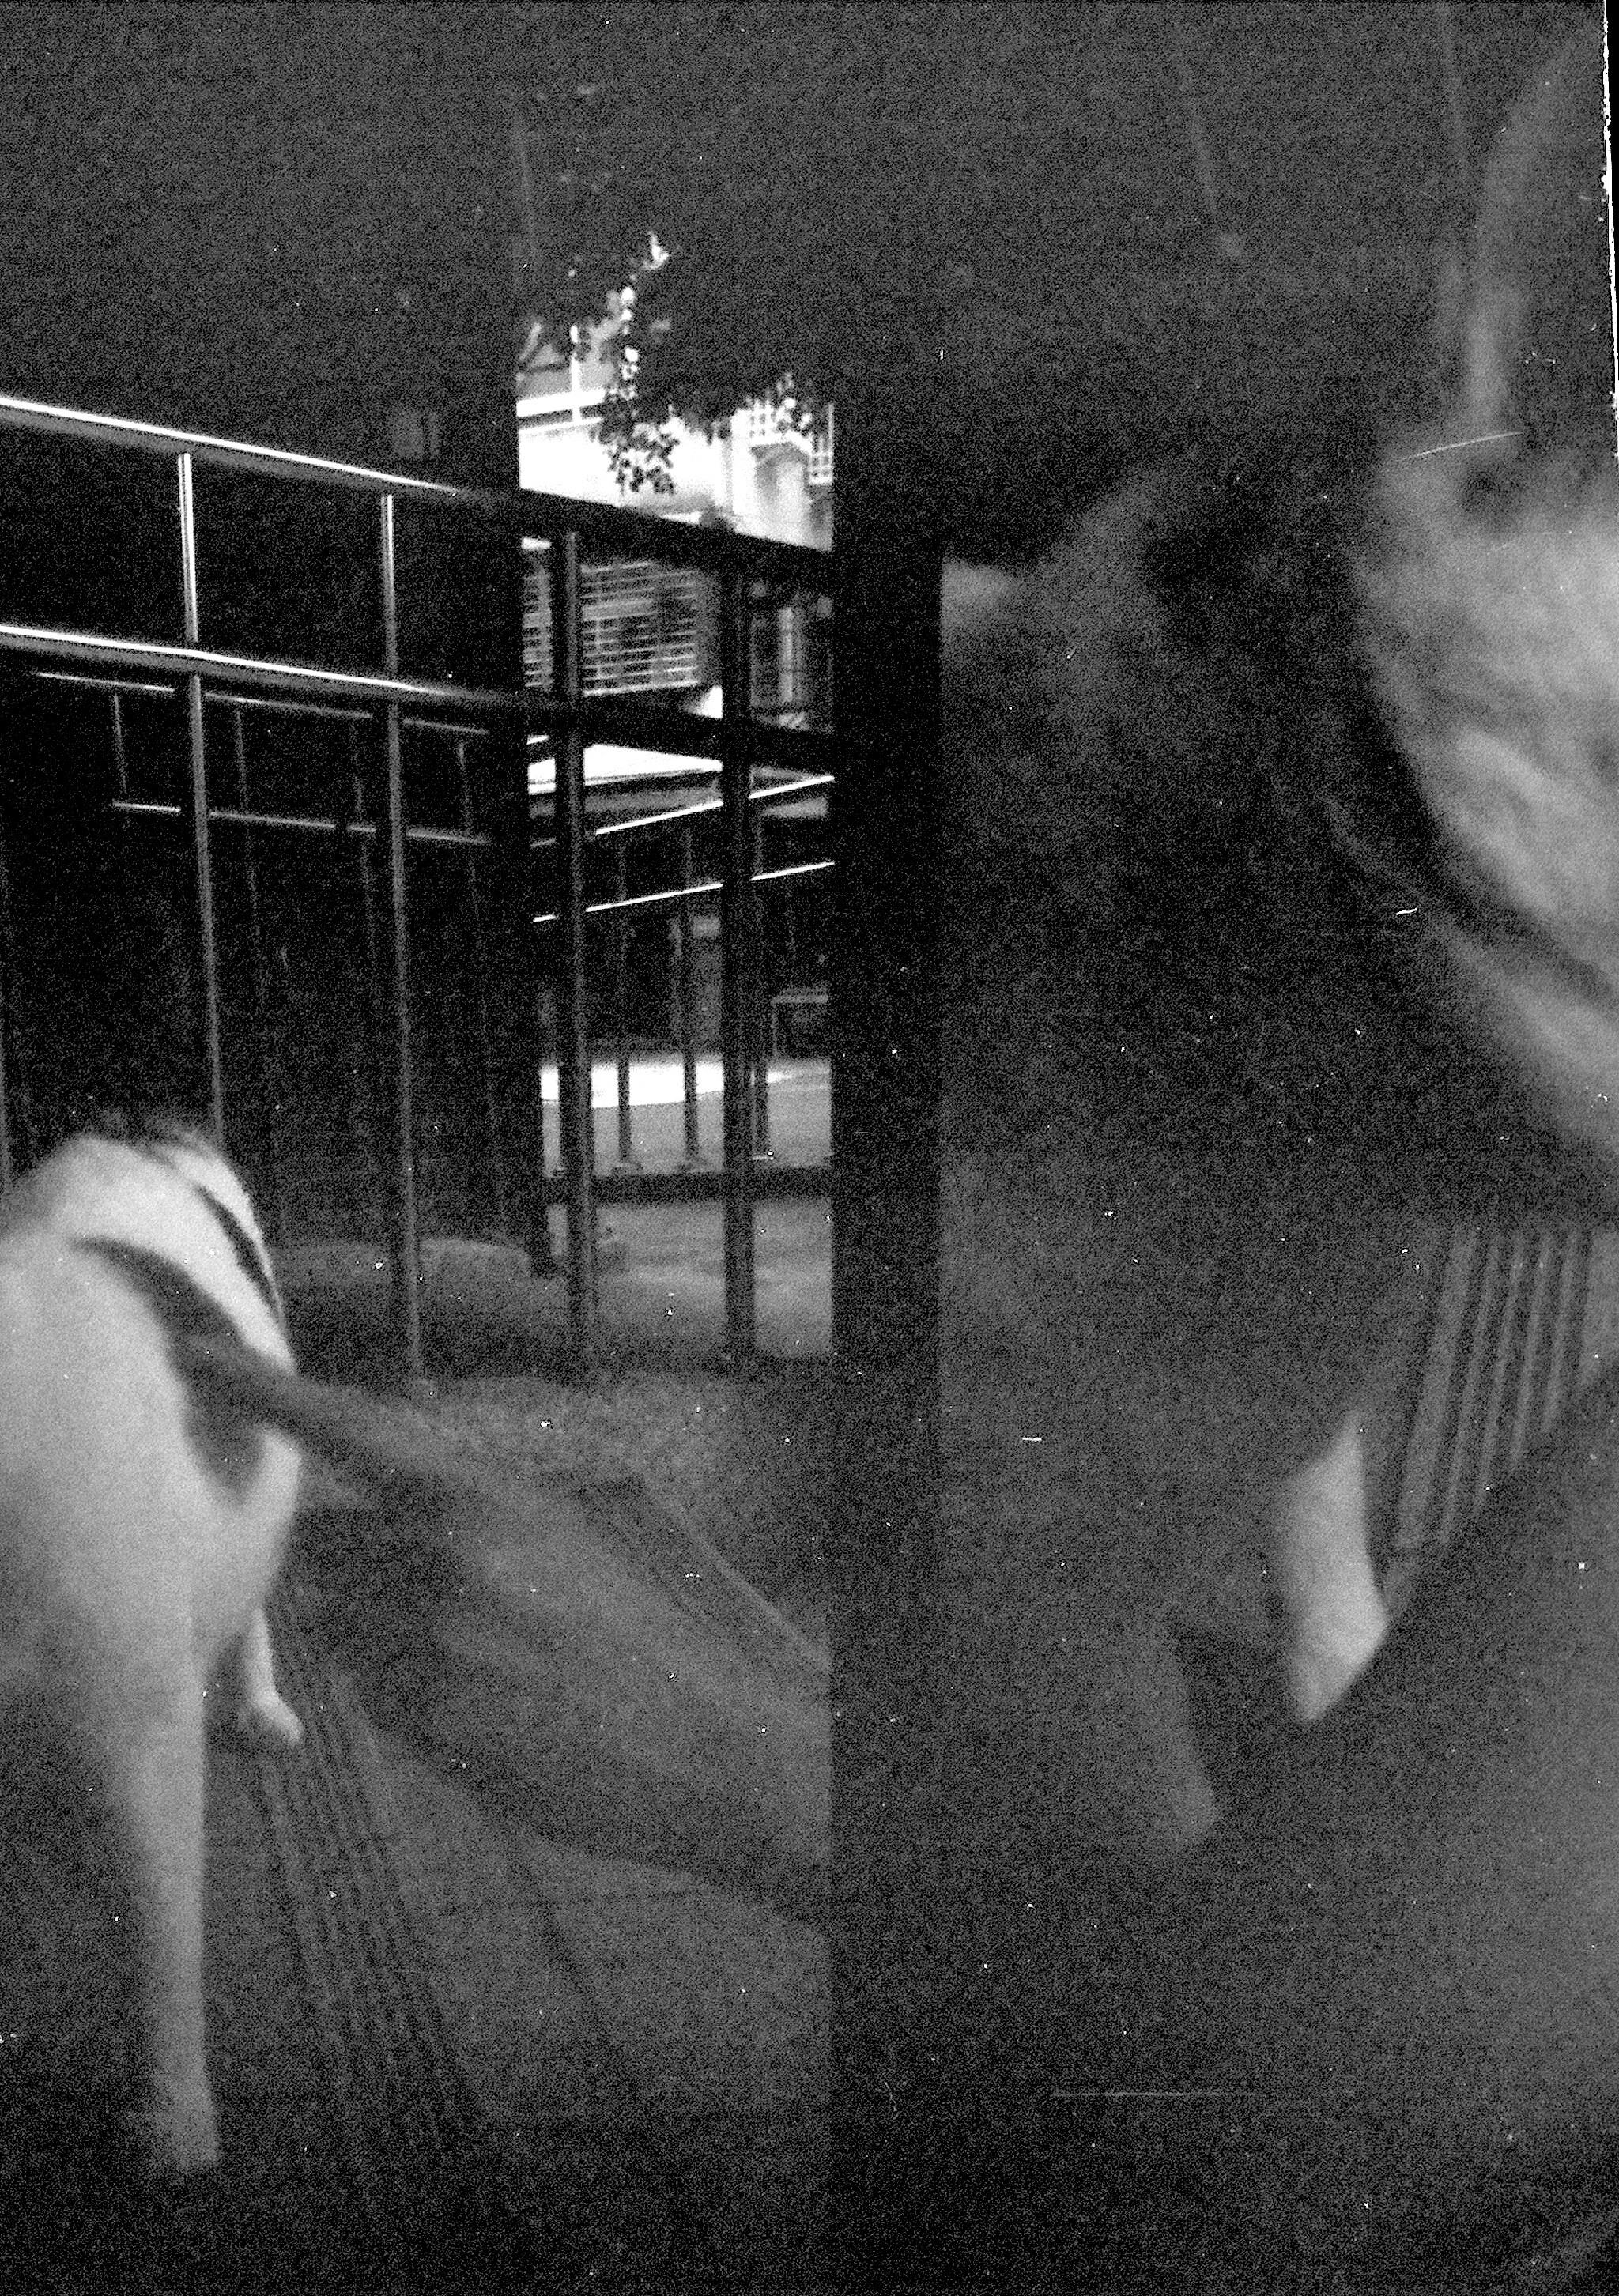 Split image of a hand touching a cat, and a blurred image of a cat.